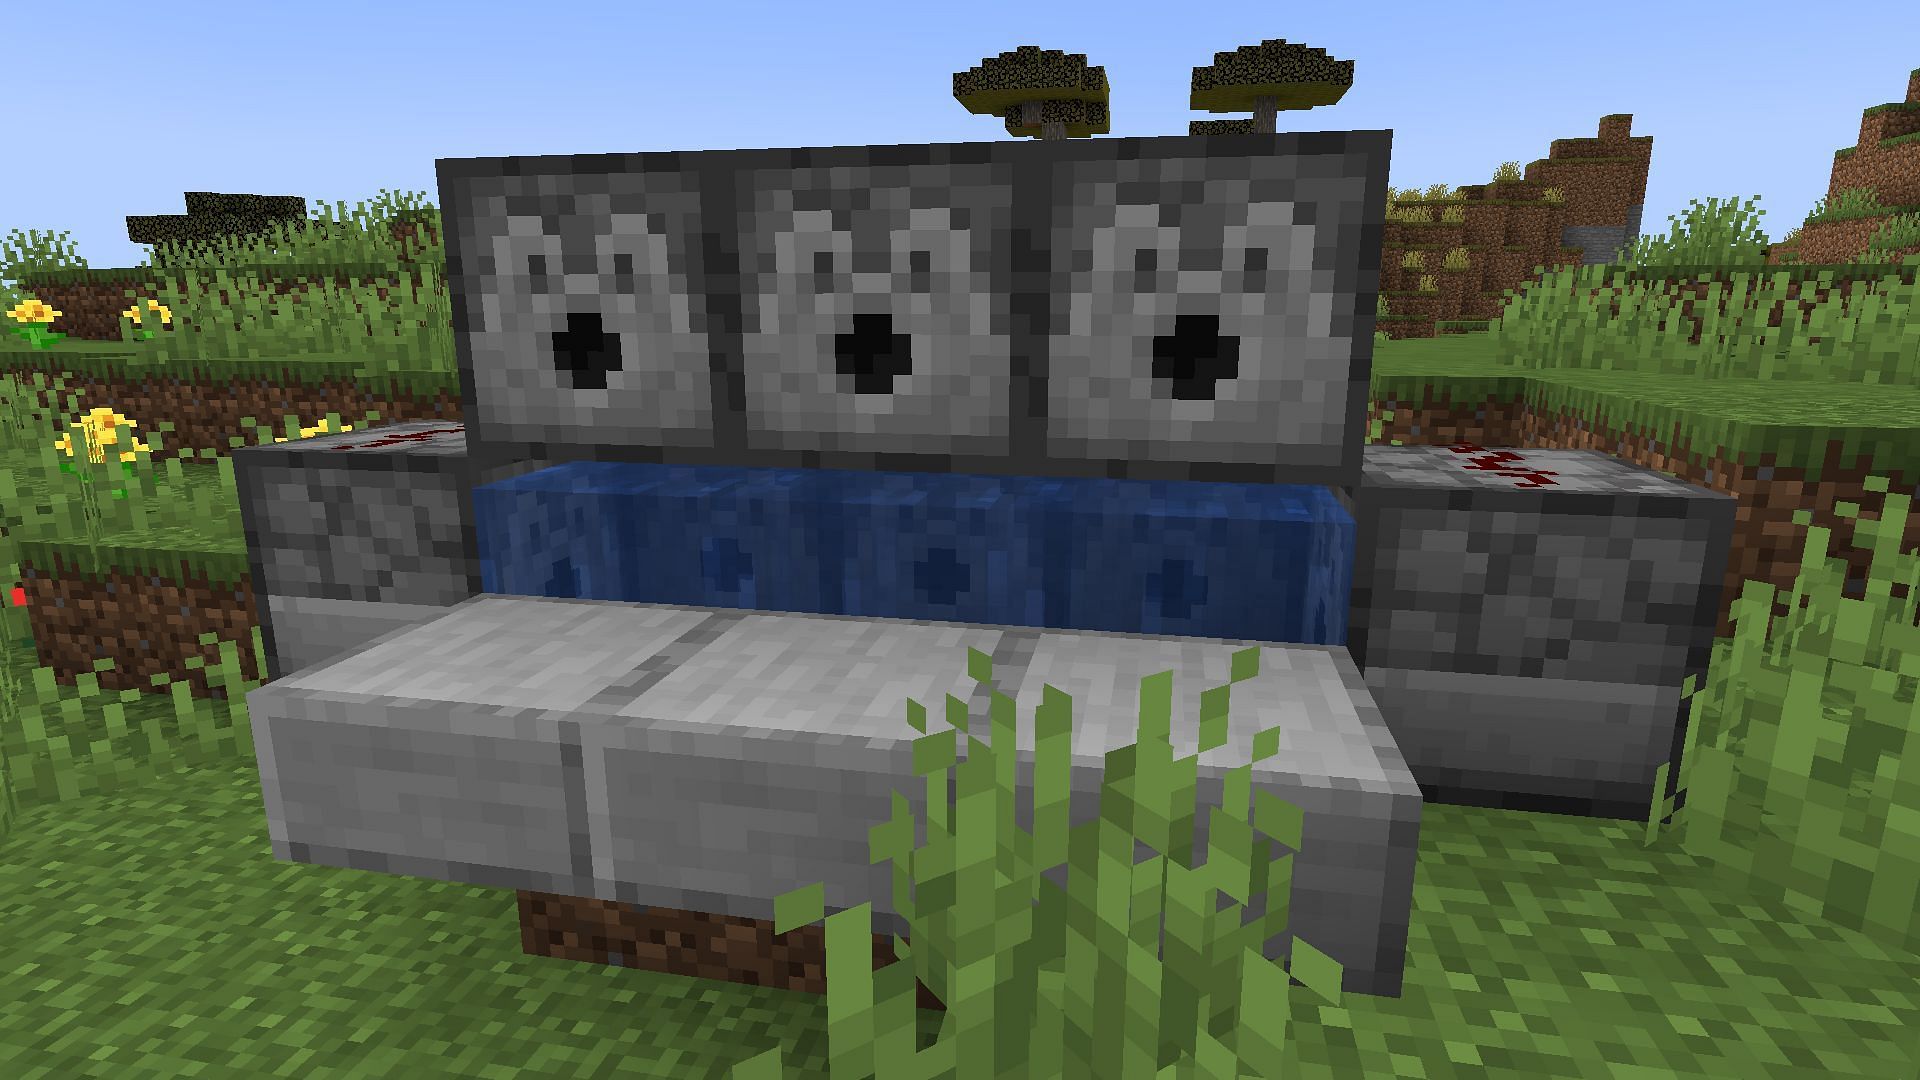 The configuration should be accurate for the cannon to work (Image via Minecraft 1.19 update)